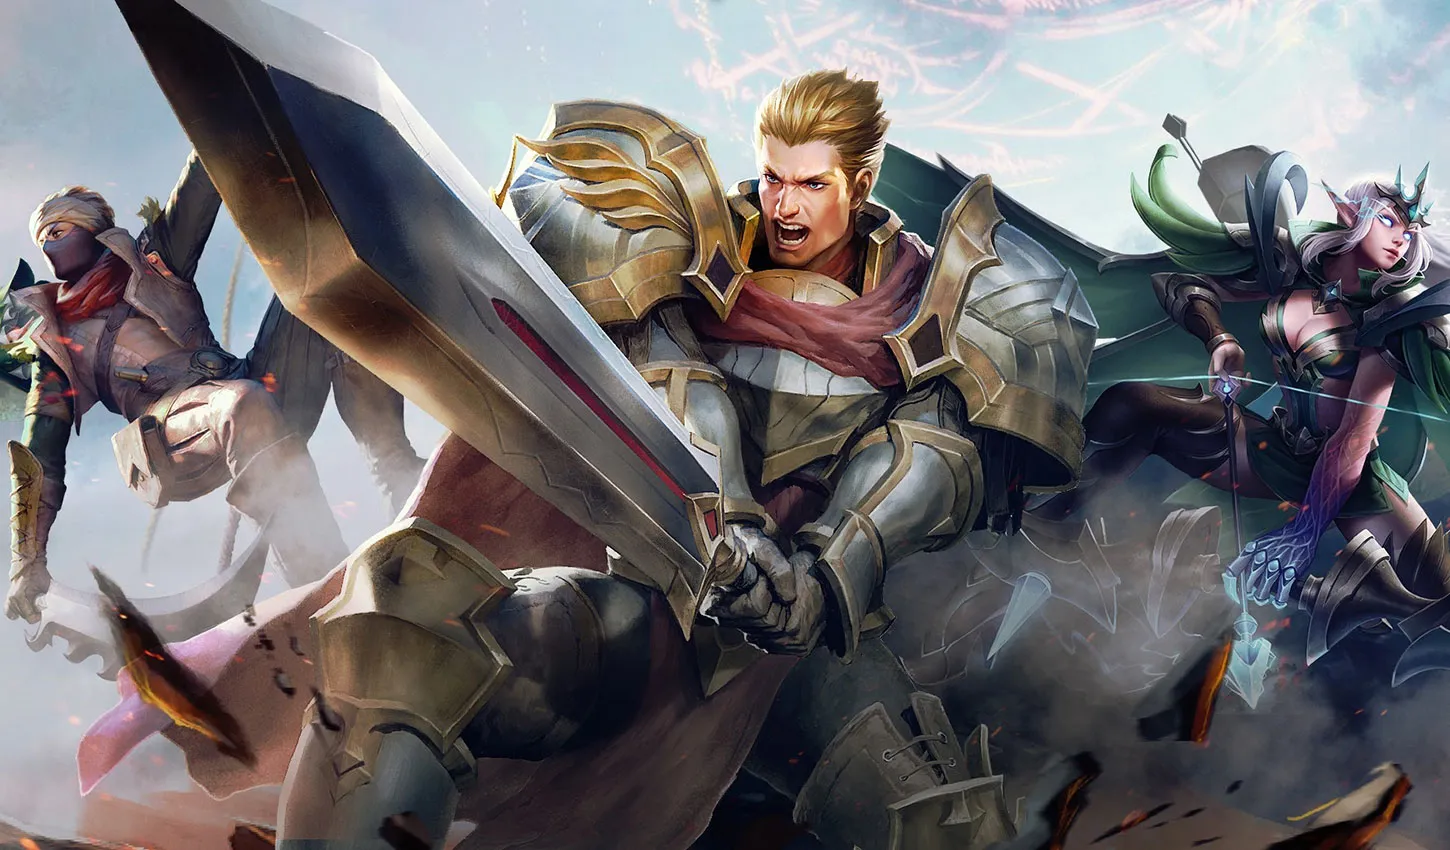 Arena of Valor lookalike Clash of Titans launching in India - Dot